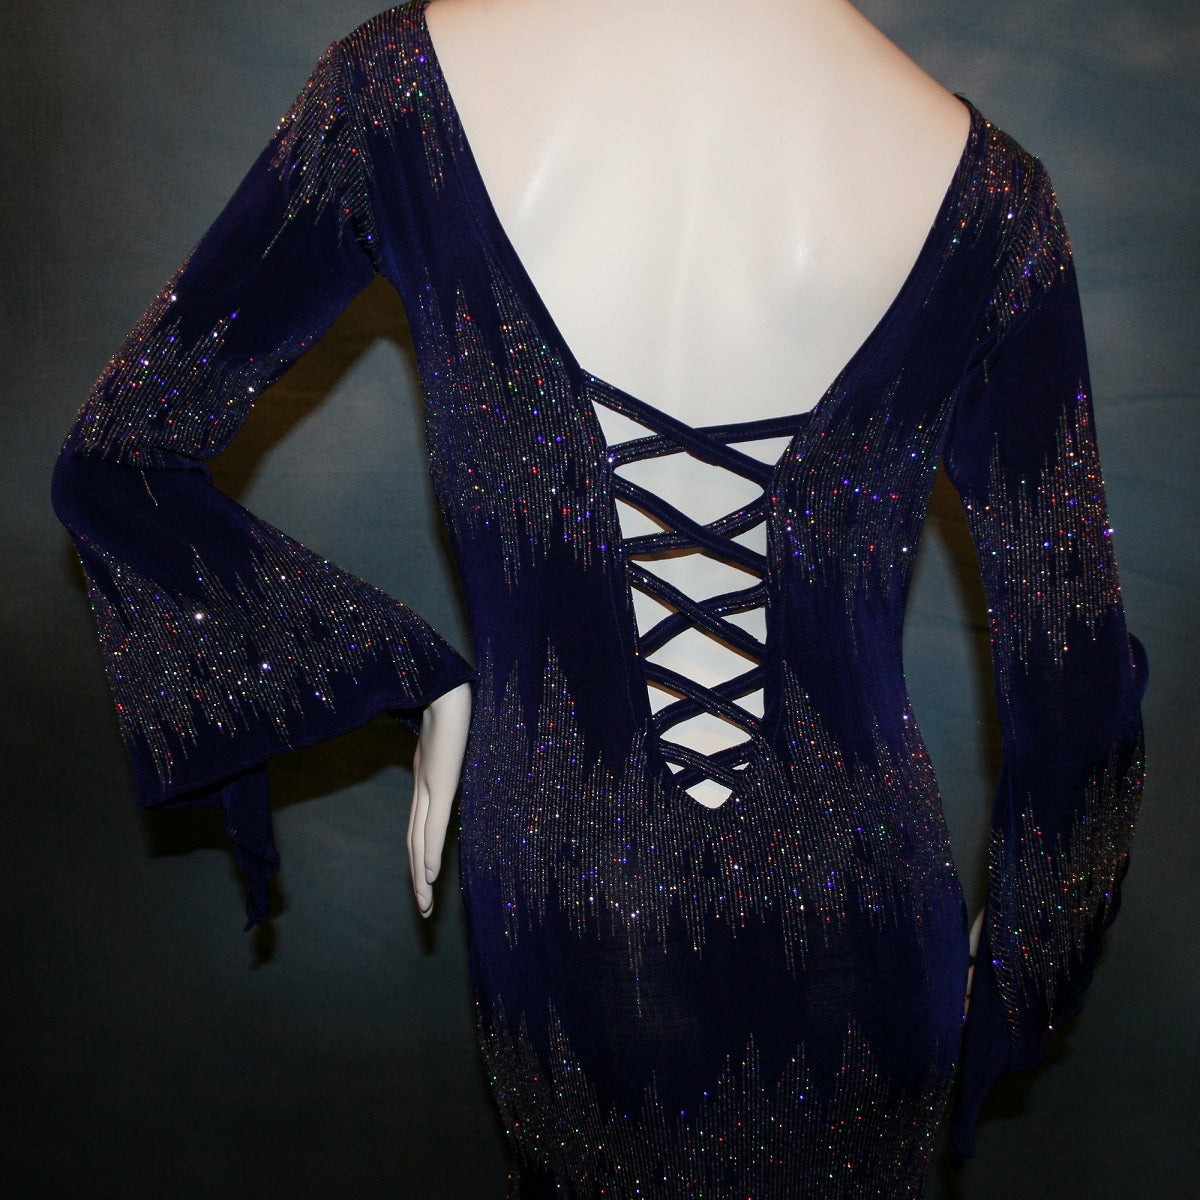 close back view of Deep royal purple Latin/rhythm/tango dress created in deep royal purple glitter slinky with an awesome electrifying glitter pattern features long flaired sleeves, lattice strap detailing up the low back & a touch of hand beading in skirting slits.